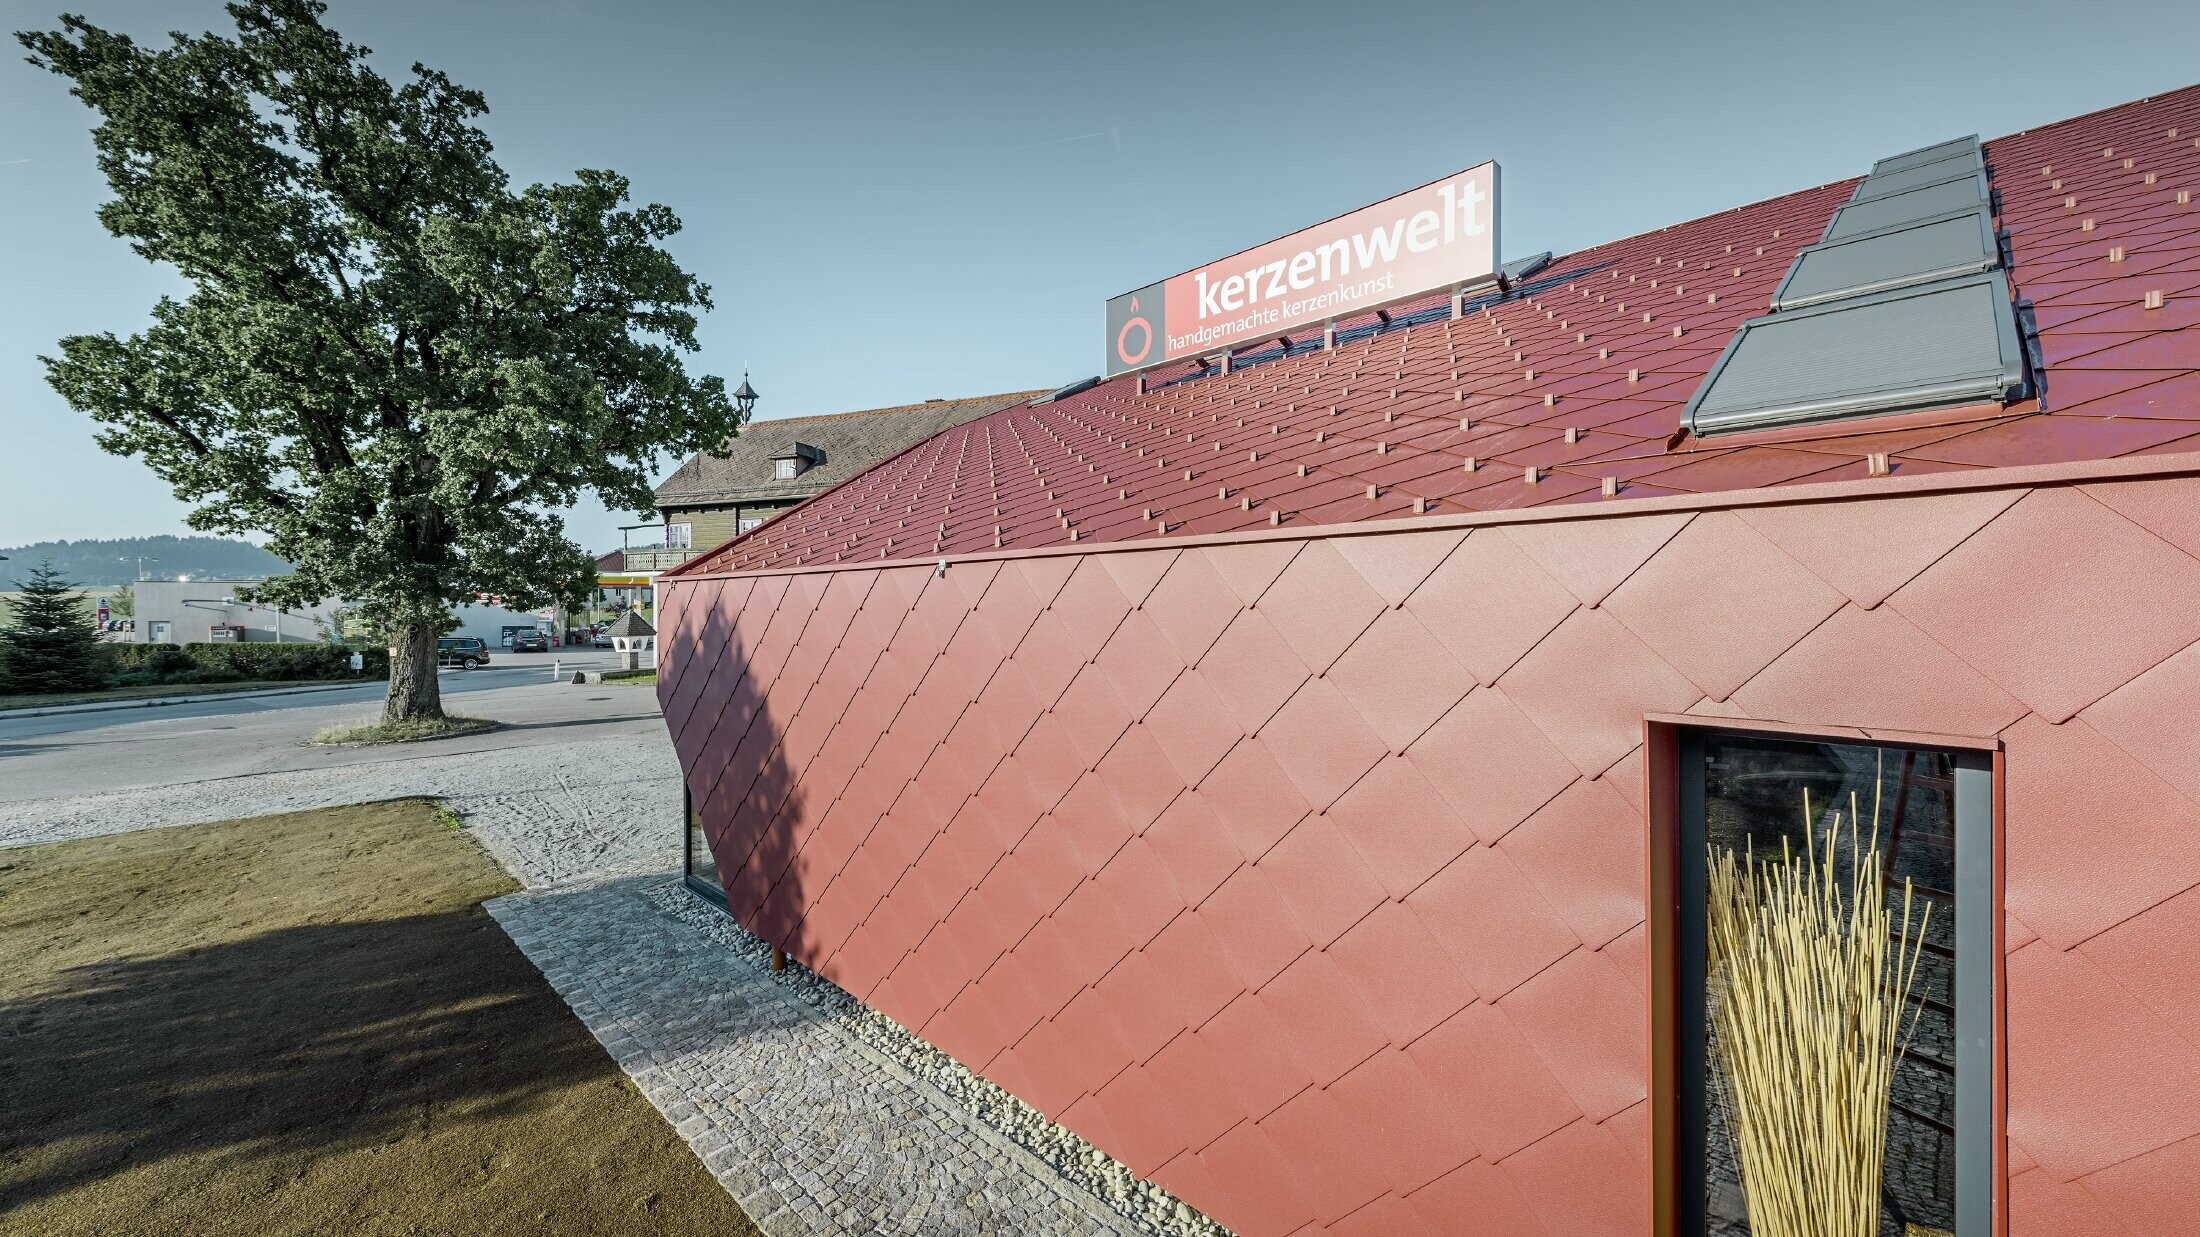 The Kerzenwelt candle store in Schlägl was completely reclad in the PREFA rhomboid tile. The 44 x 44 rhomboid façade tile in oxide red was used for the roof cover and the façade cladding.